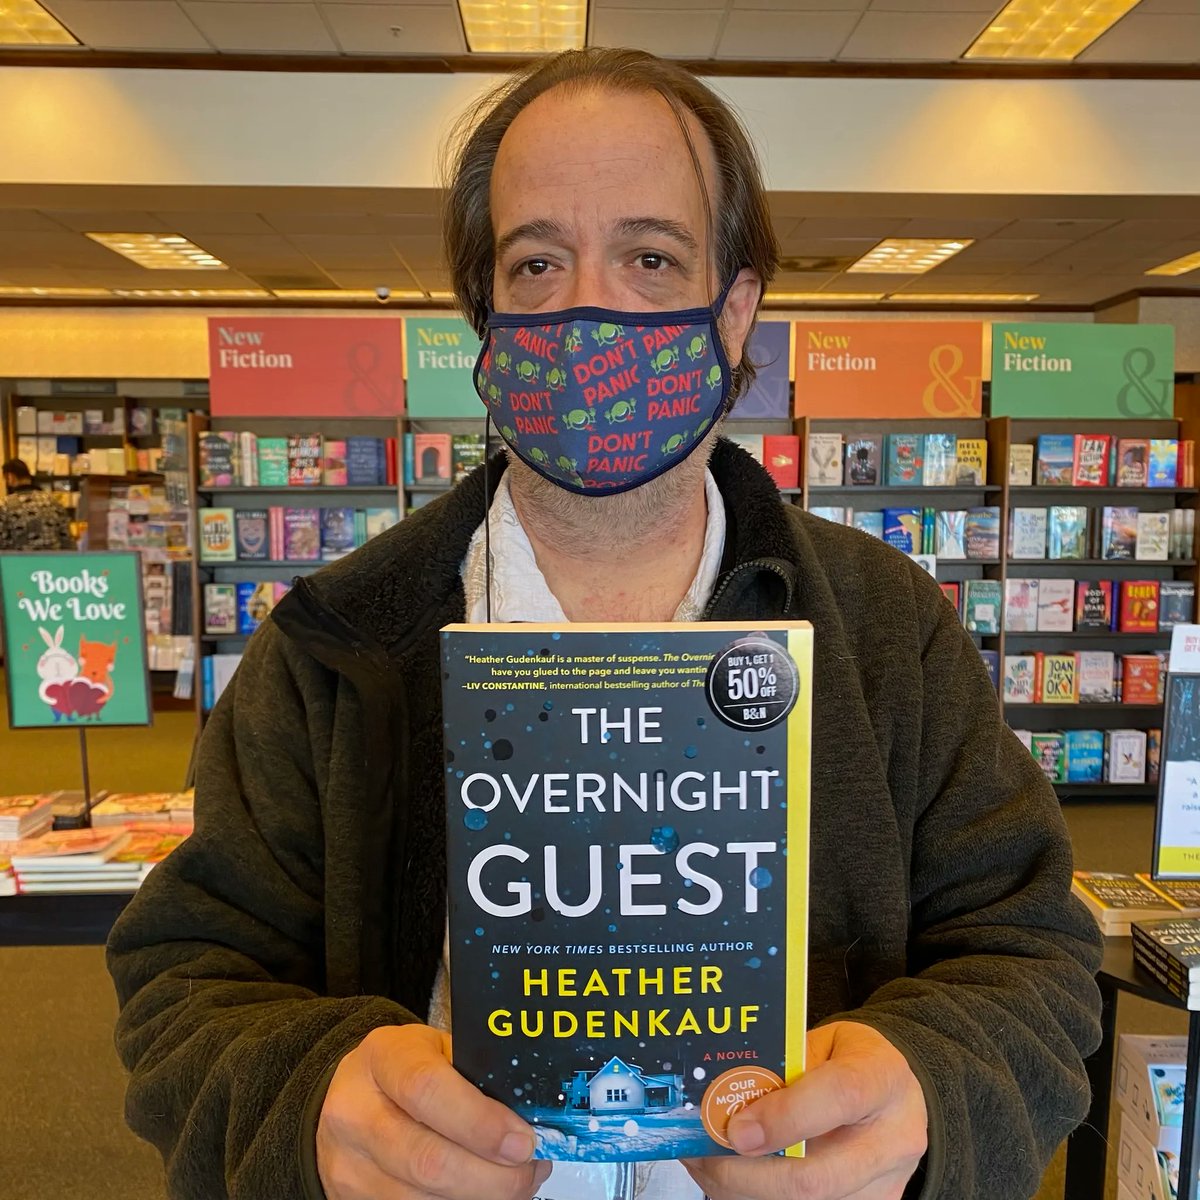 This month’s mystery pick is “The Overnight Guest” by Heather Gudenkauf!  
A woman receives an unexpected visitor during a deadly snowstorm, and here she was, thinking she was all alone…

📚 #theovernightguest #heathergudenkauf #mysterypick #142bn #barnesandnoble 📚